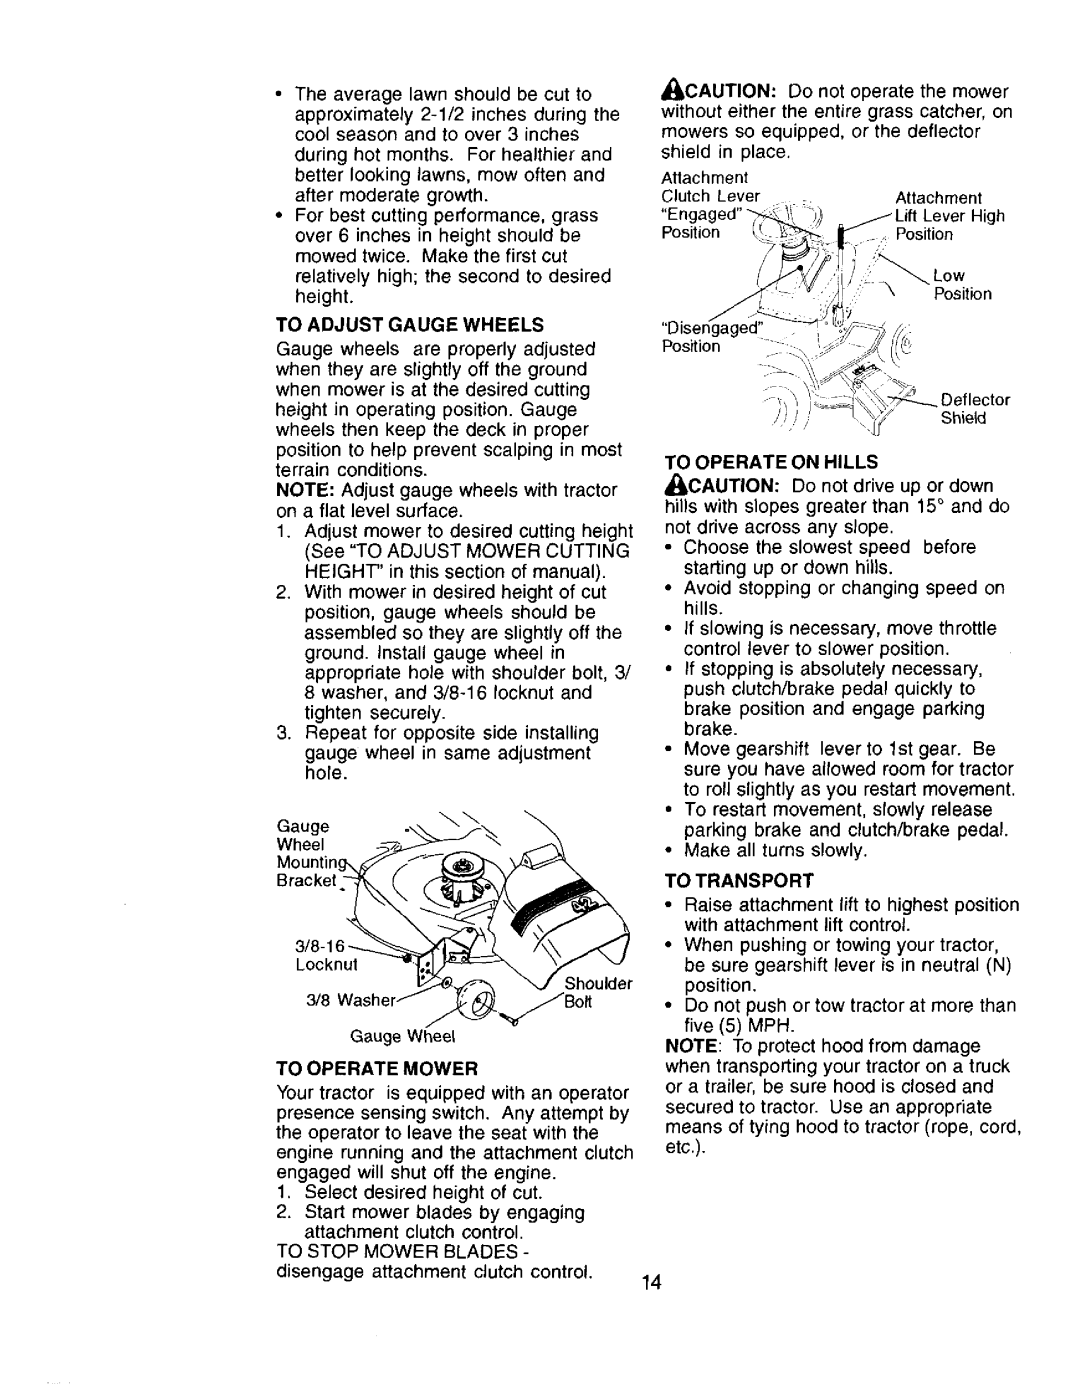 Craftsman 917.272057 owner manual To Adjust Gauge Wheels, Clutch, To Operate Mower, To Transport 